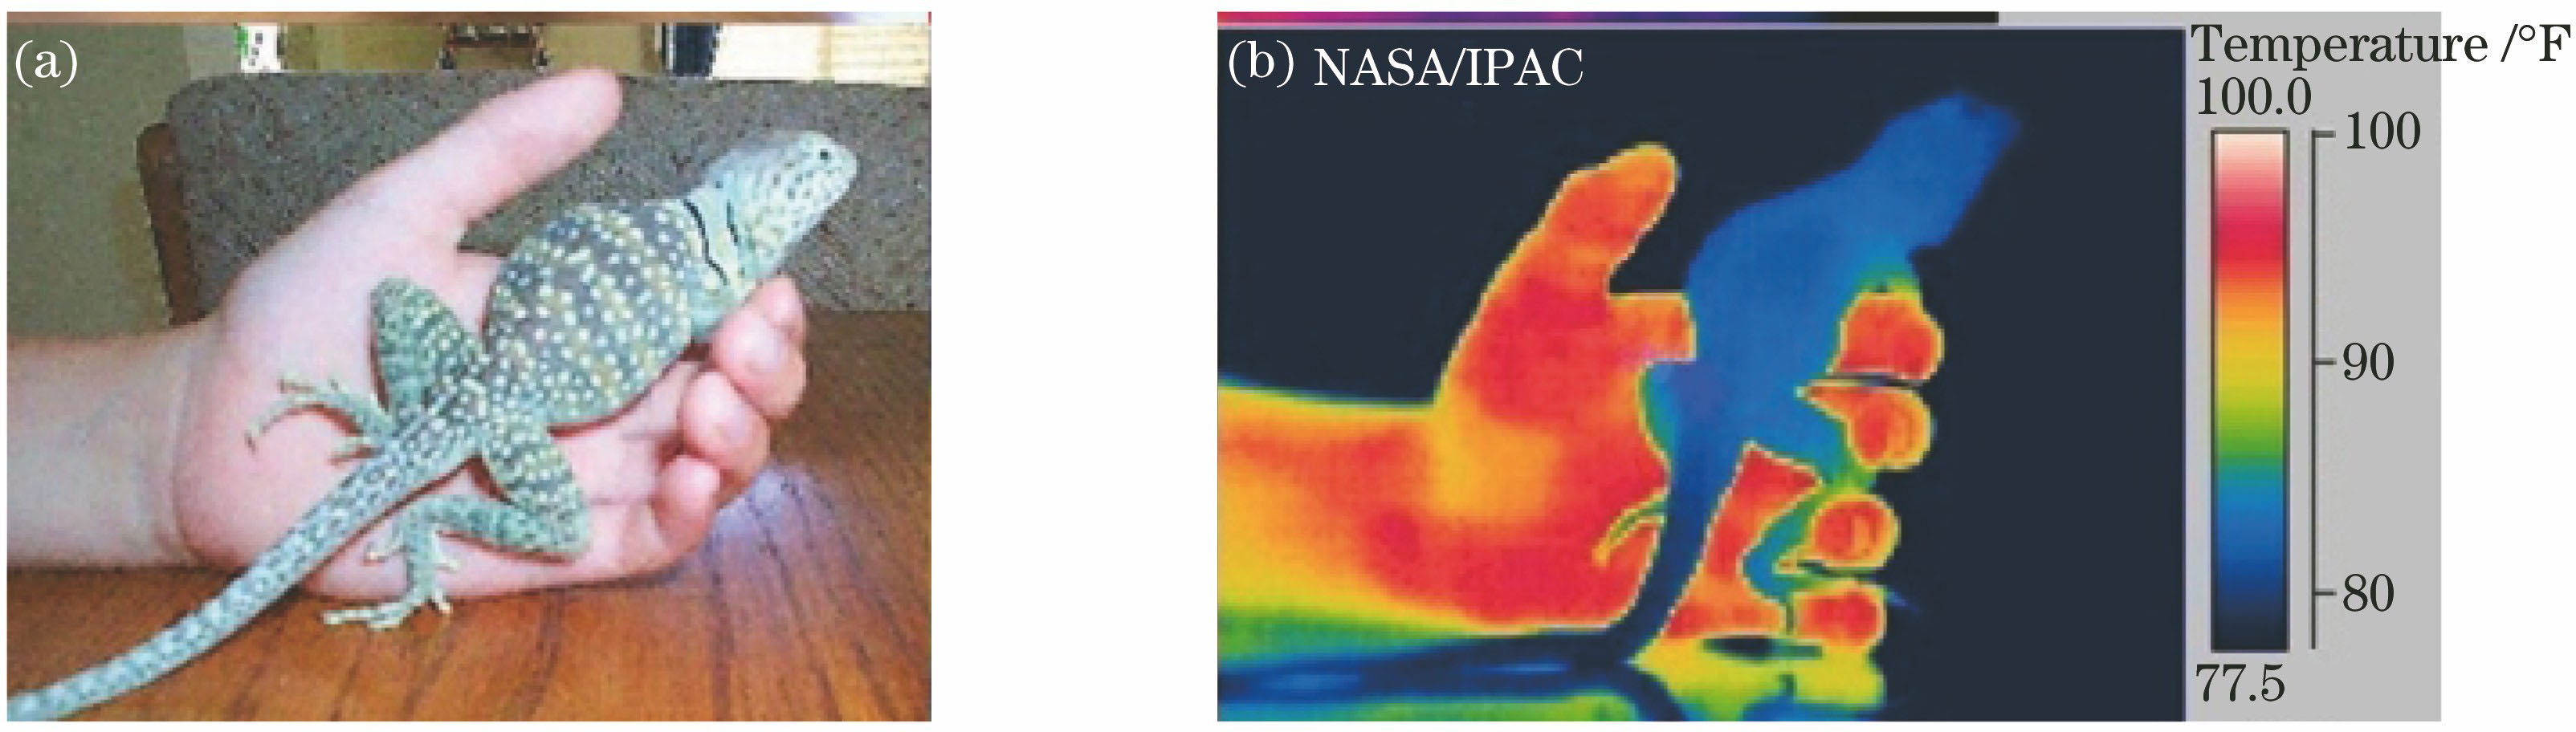 (a) Visible and (b) infrared images of human hand and house lizard